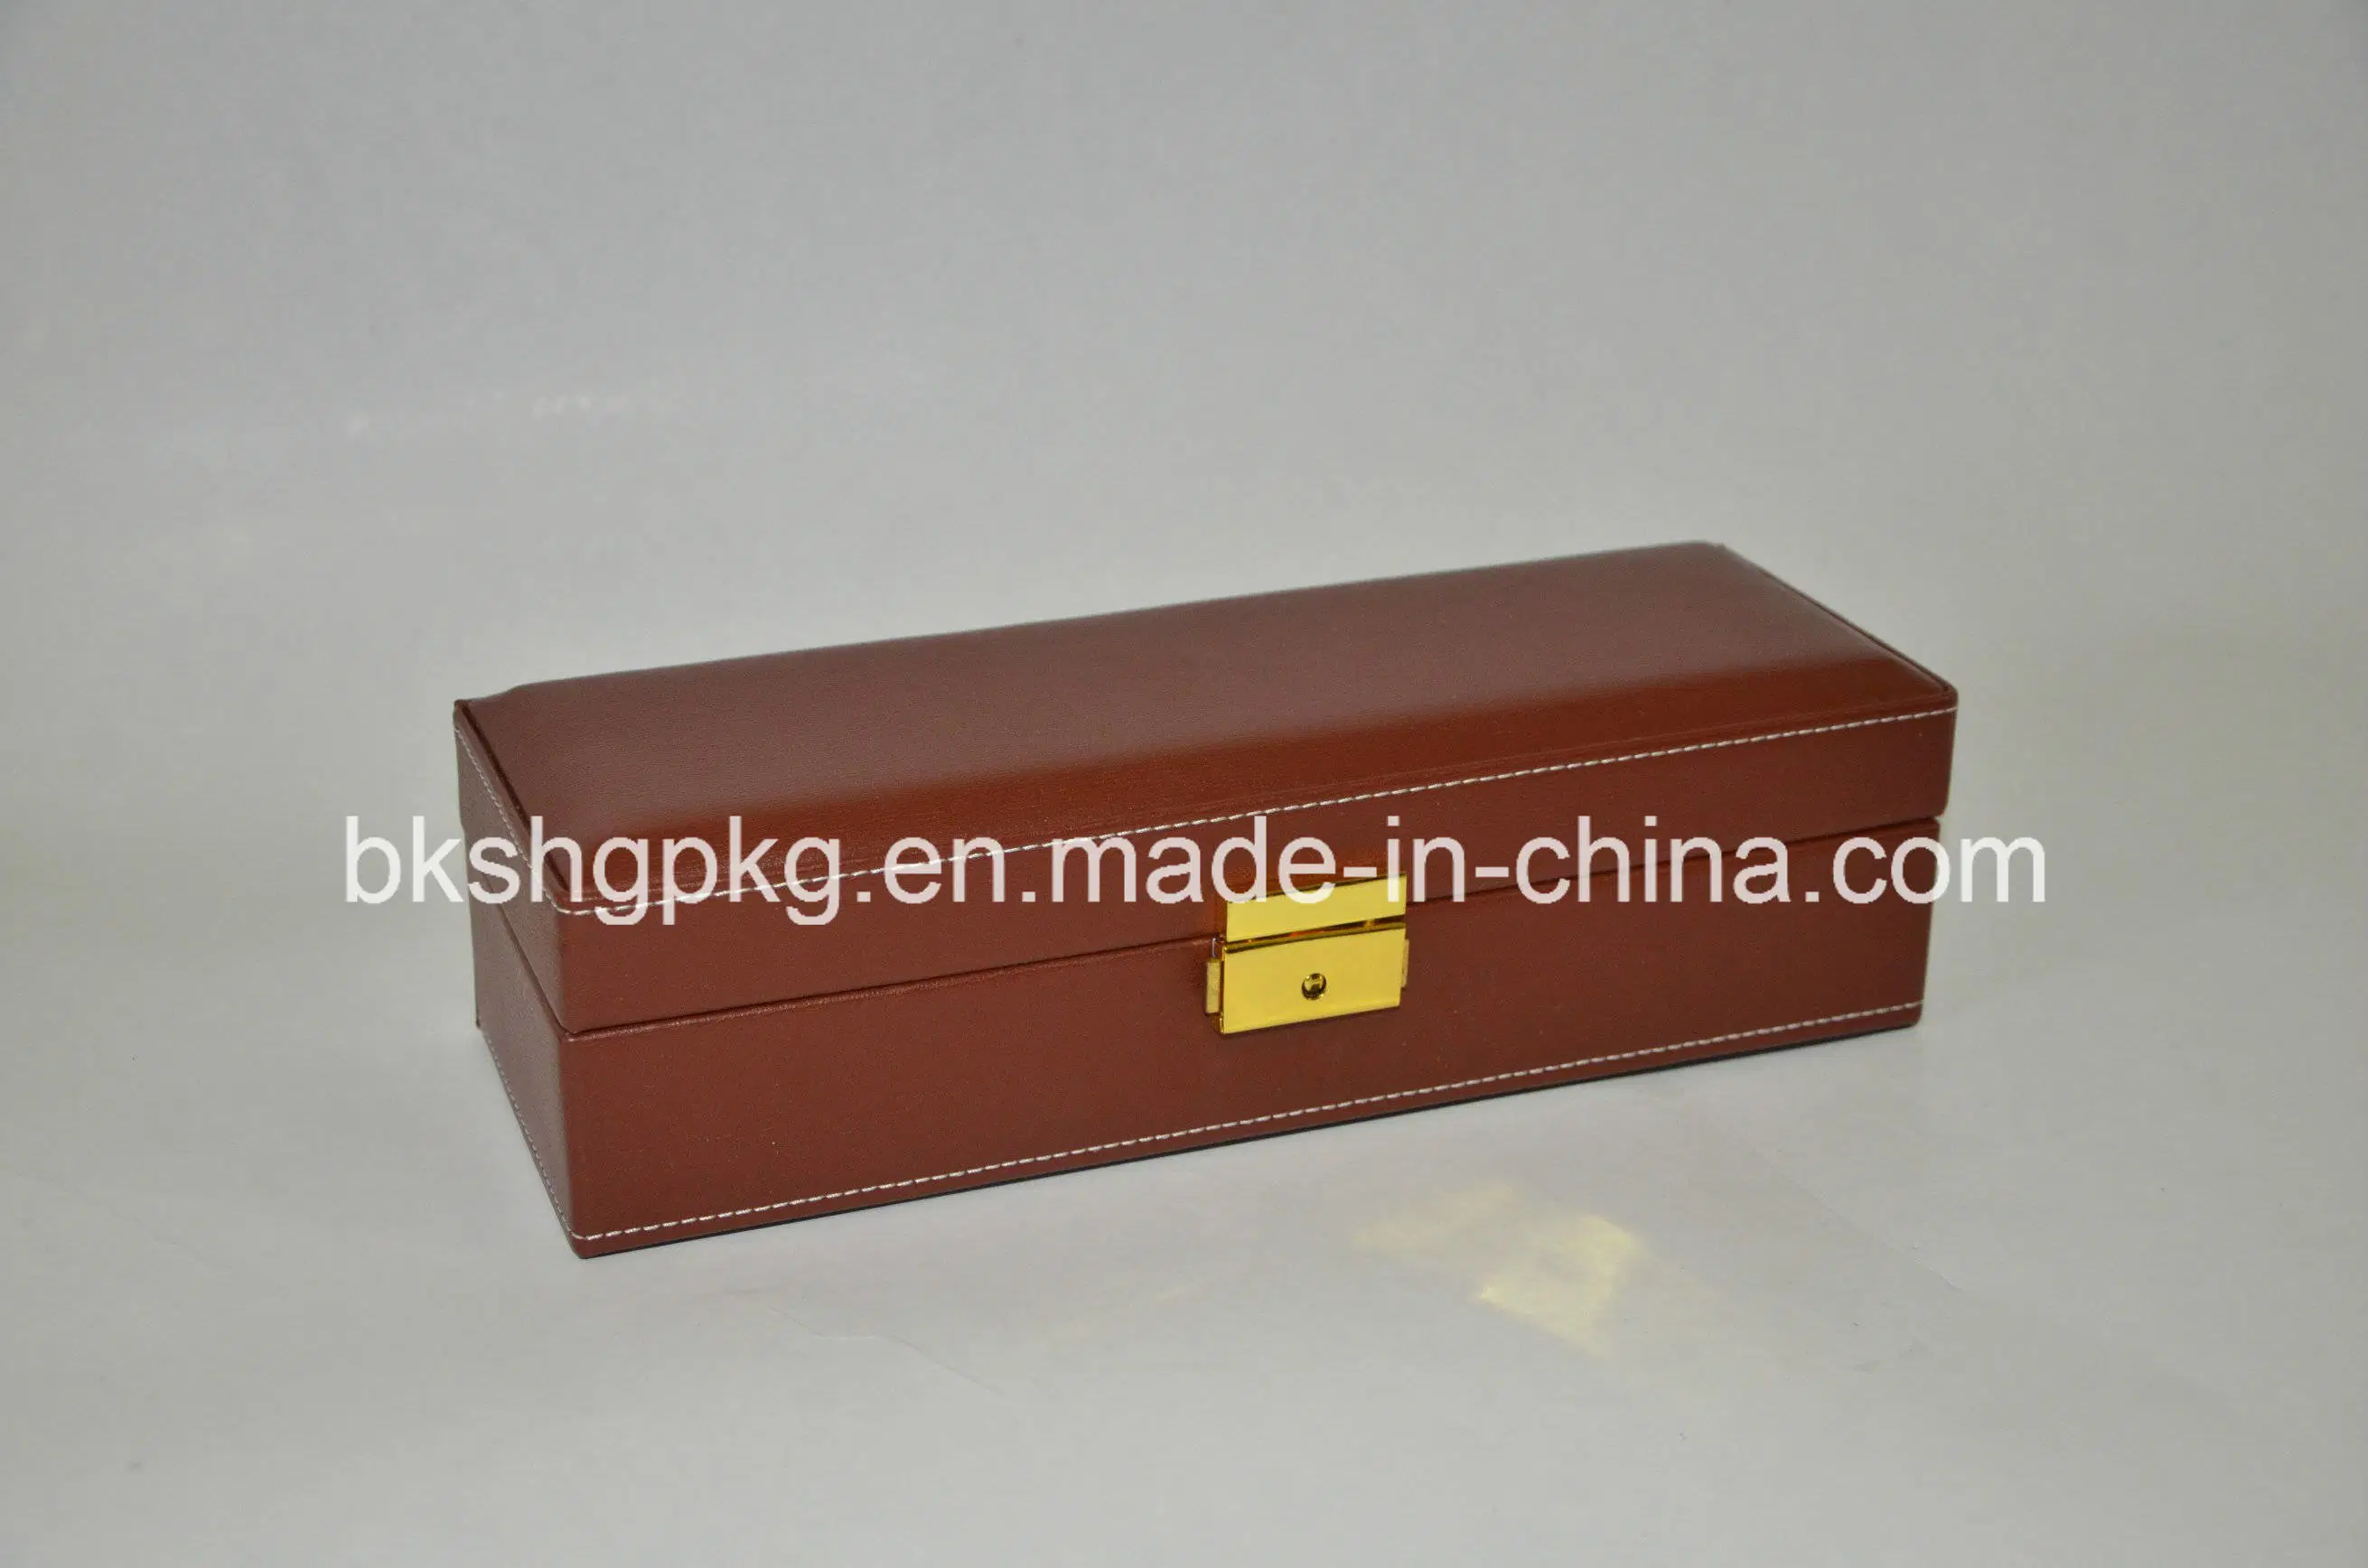 Unique Design Customized Watch Box for 6 Watches Leather Gift Box